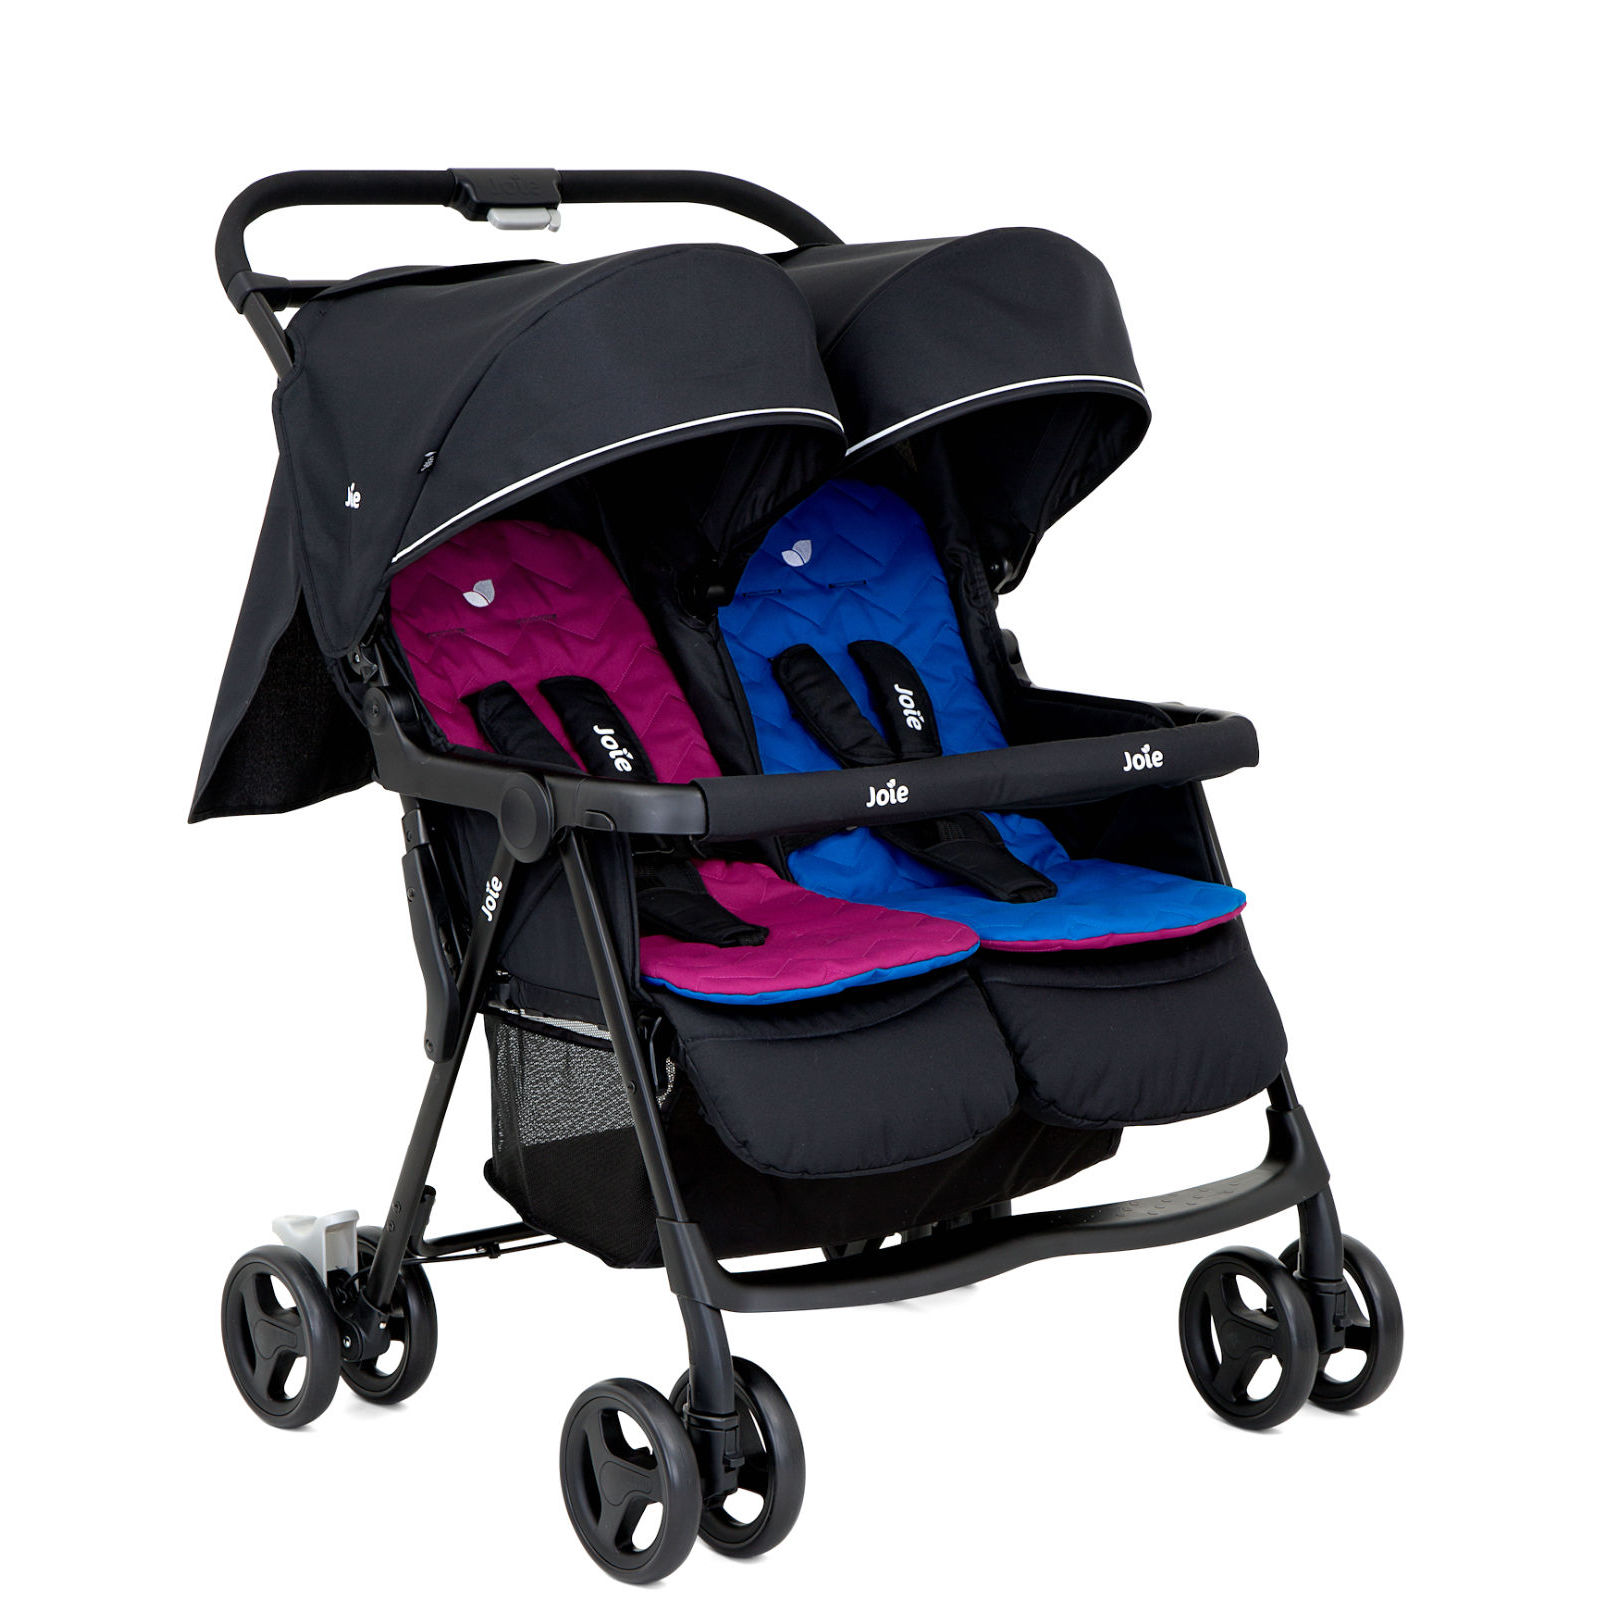 footmuff for joie double buggy